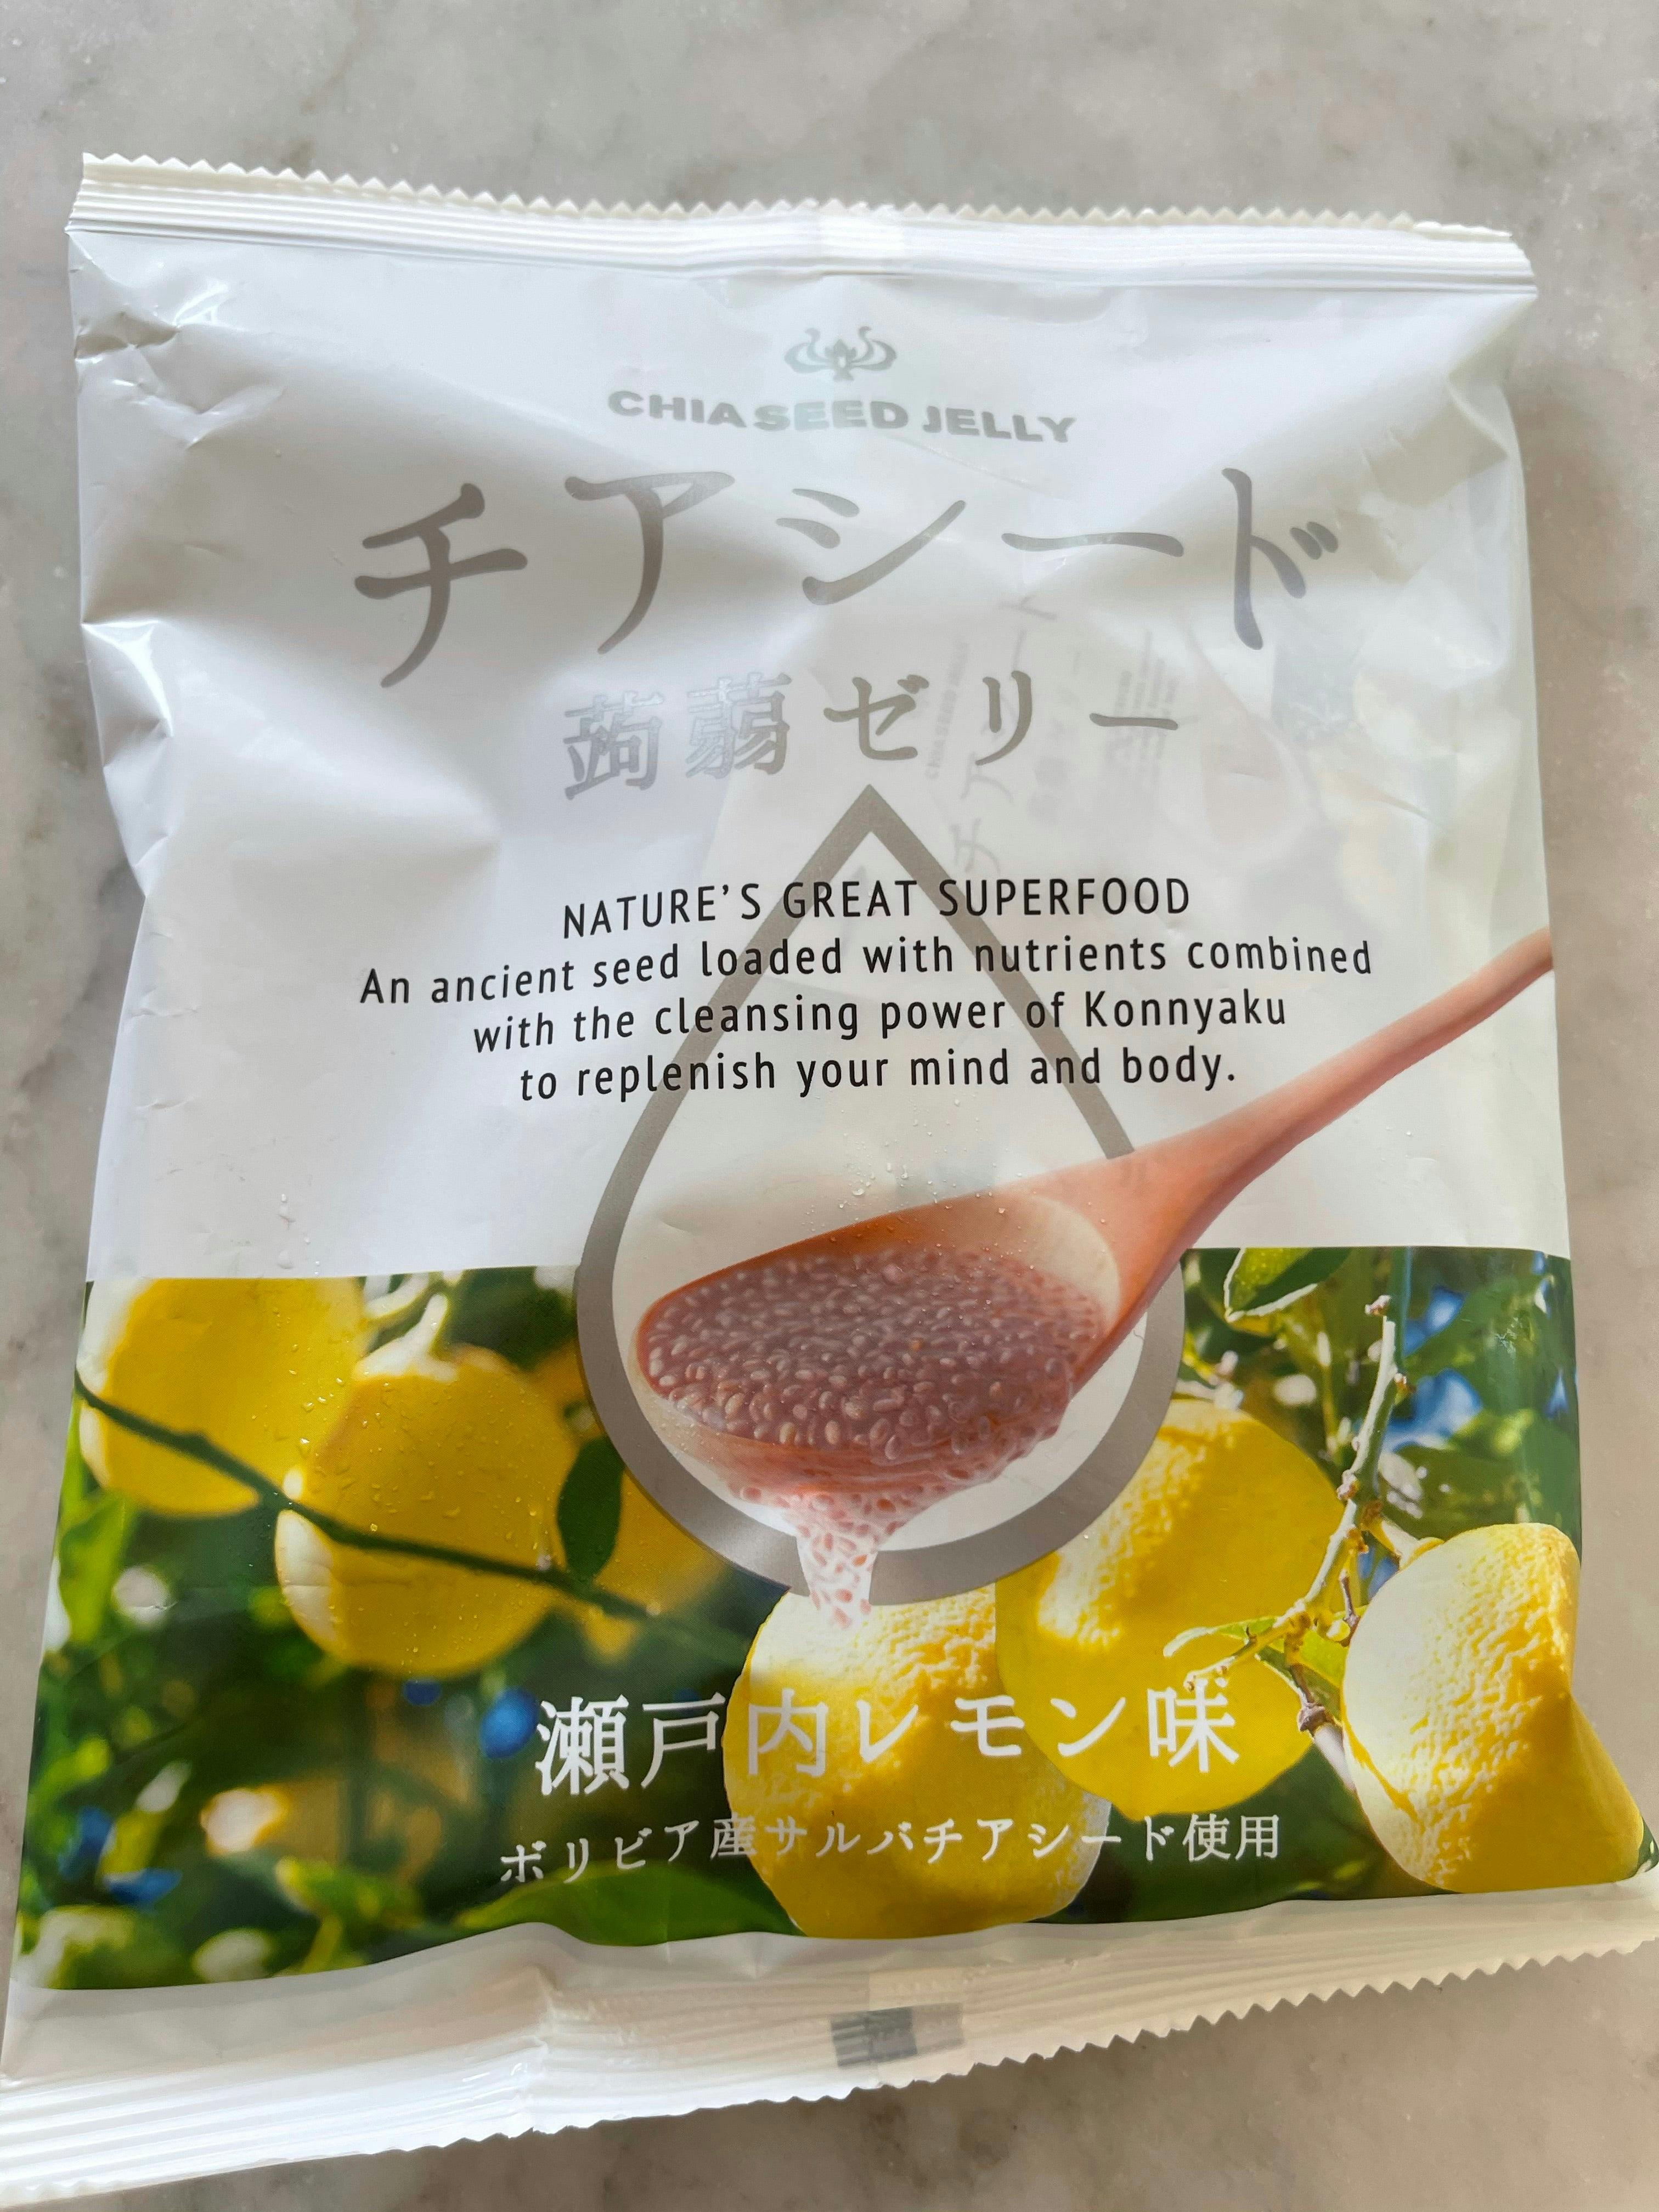 Lemon-Flavored Chia Seeds Jelly